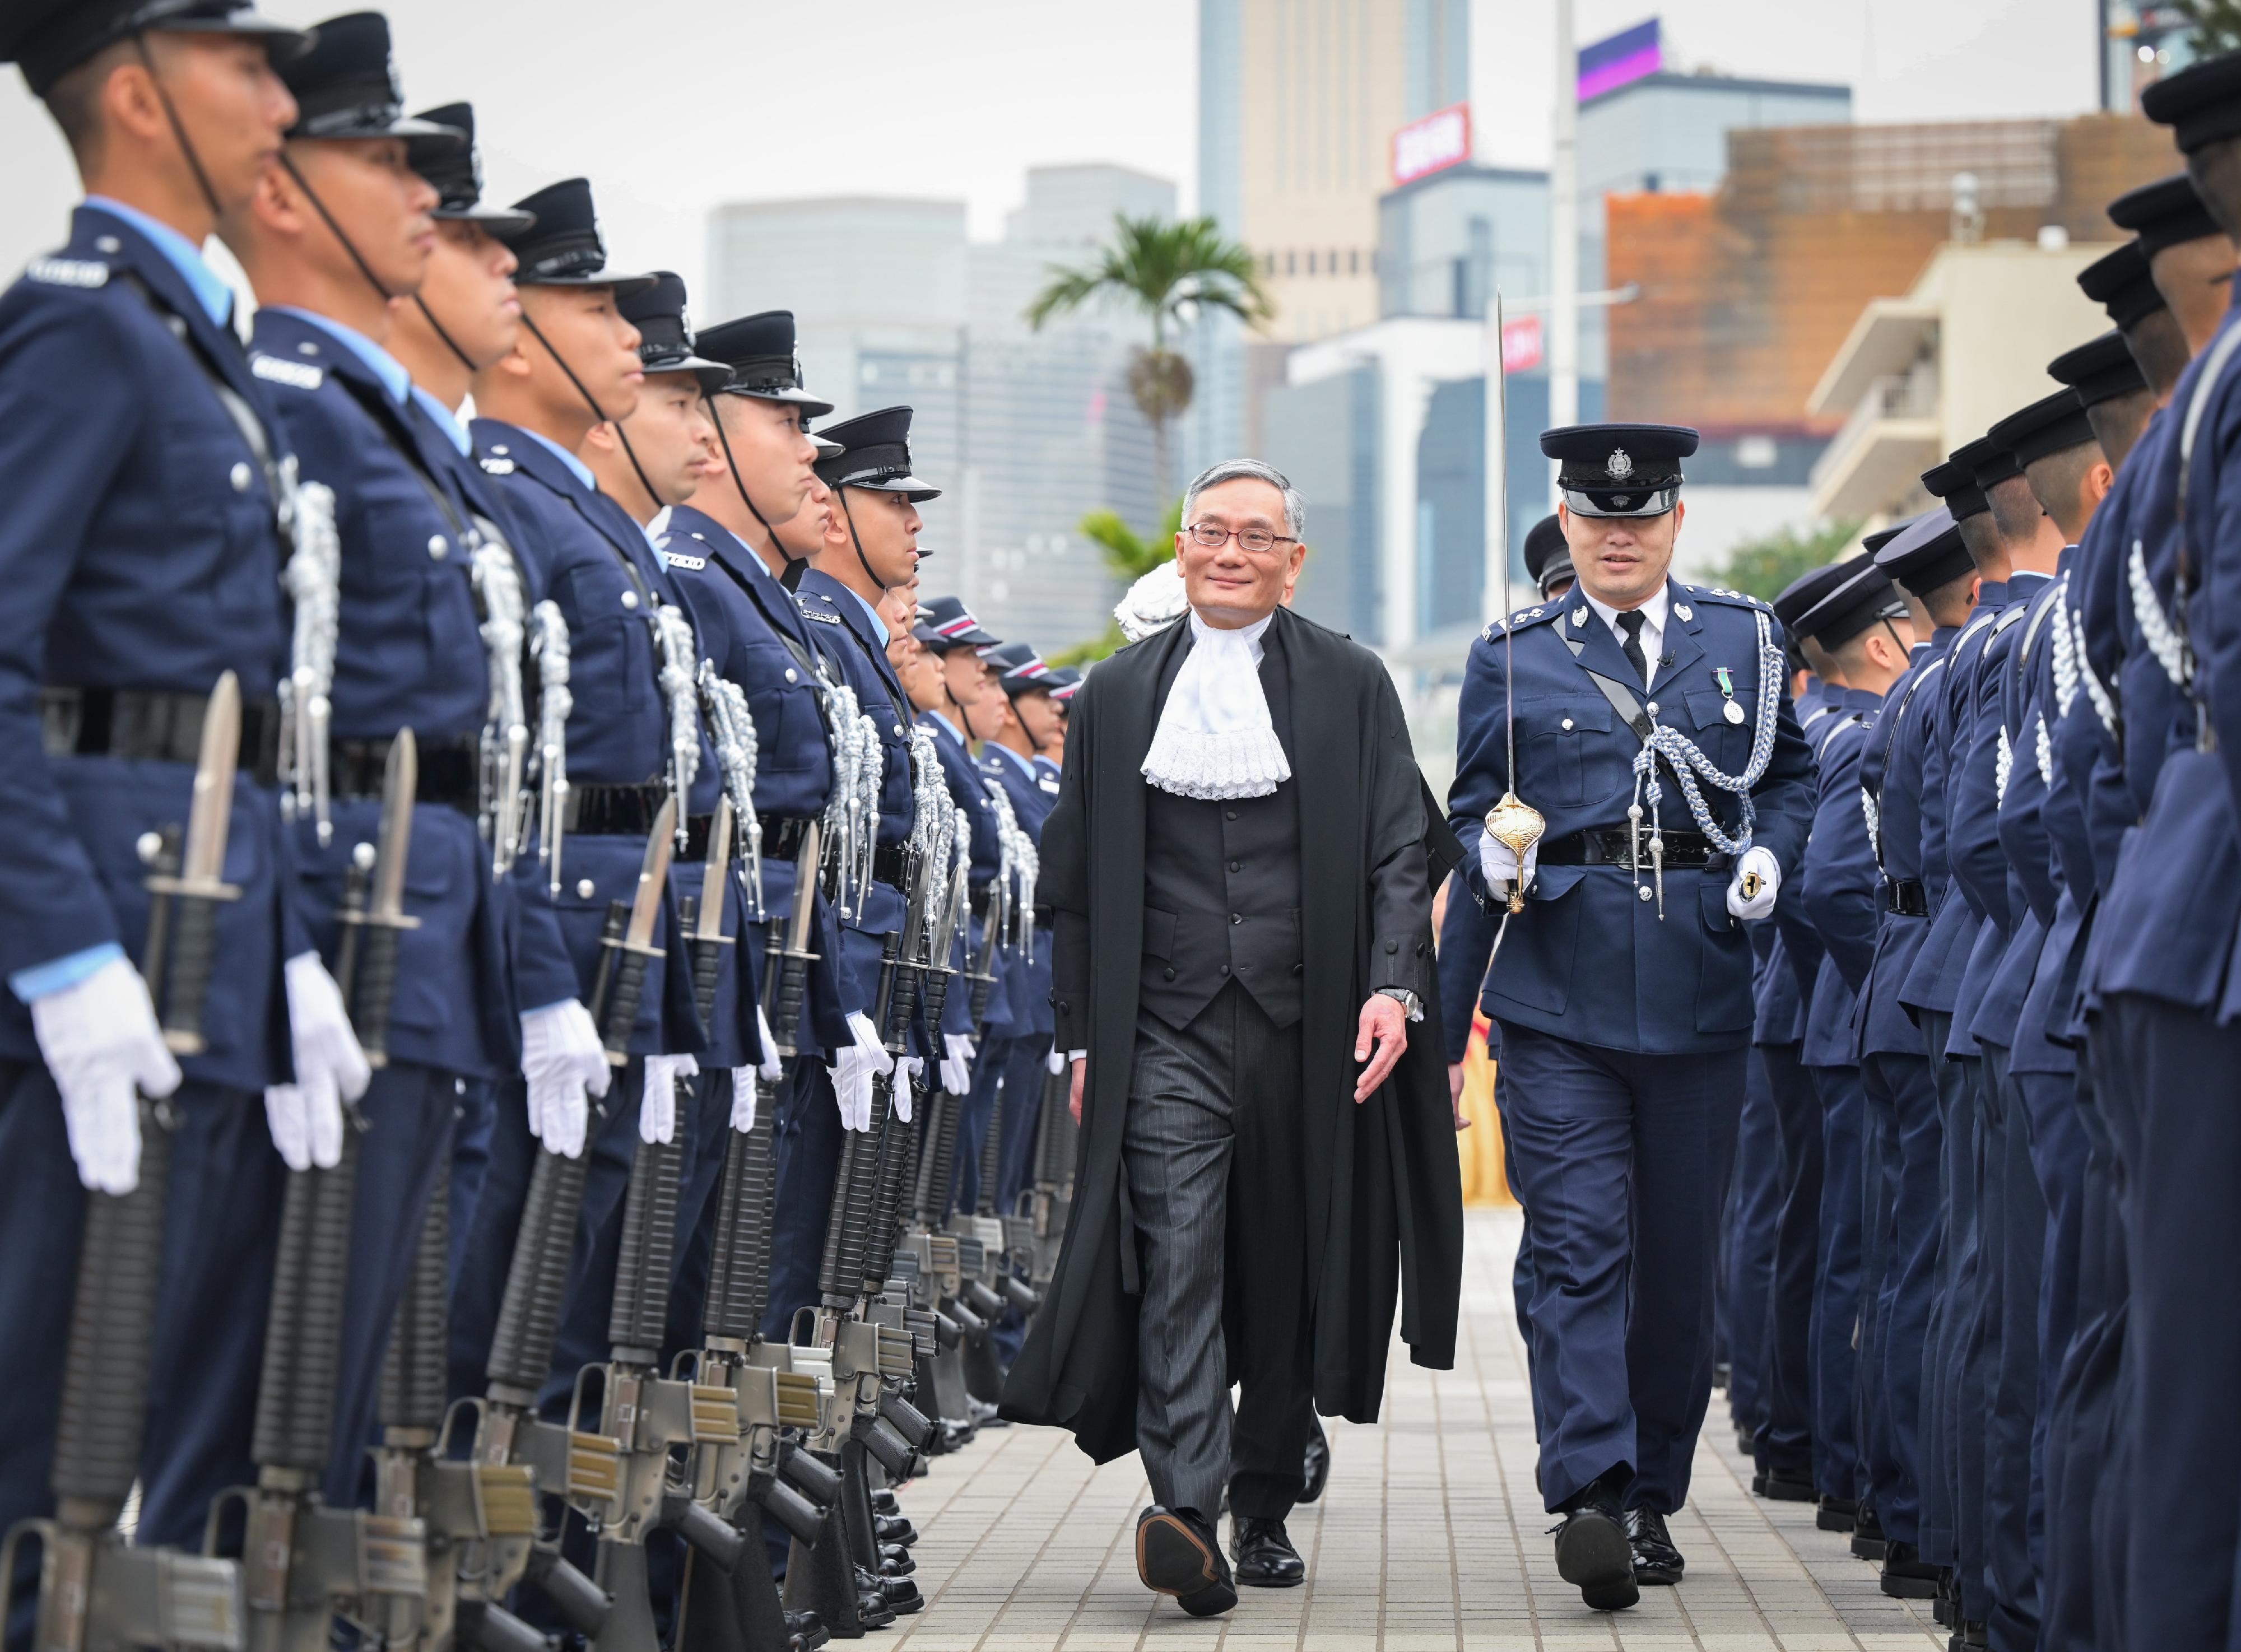 Chief Justice Andrew Cheung Kui-nung, Chief Justice of the Court of Final Appeal, inspects a Ceremonial Guard mounted by the Hong Kong Police Force at Edinburgh Place during the Ceremonial Opening of the Legal Year 2024 today (January 22).
